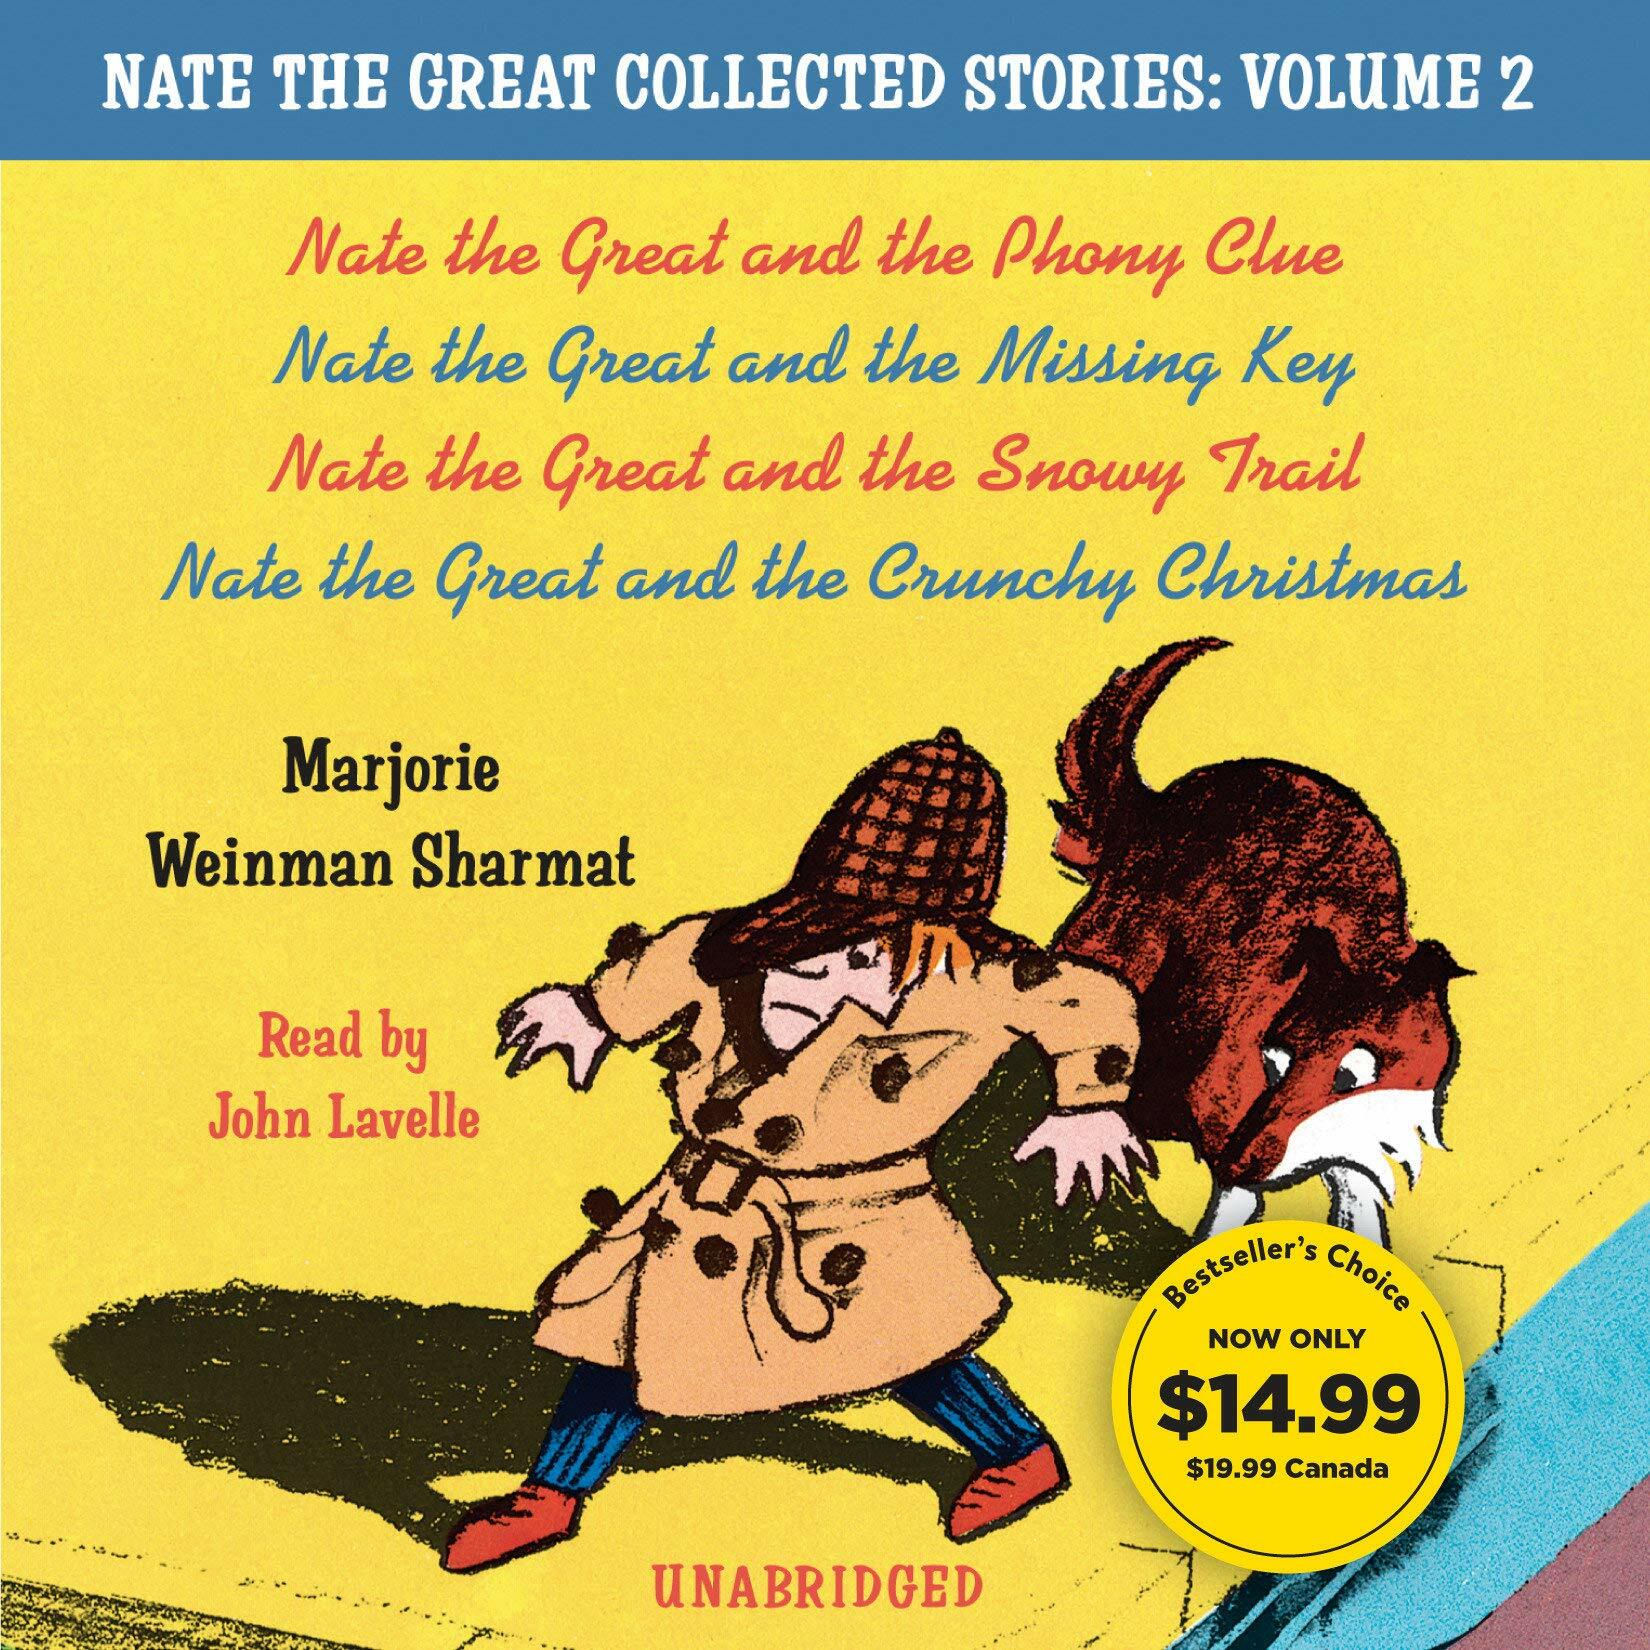 Nate the Great Collected Stories: Volume 2: Nate the Great and the Phony Clue; Nate the Great and the Missing Key; Nate the Great and the Snowy Trail; (Audio CD)